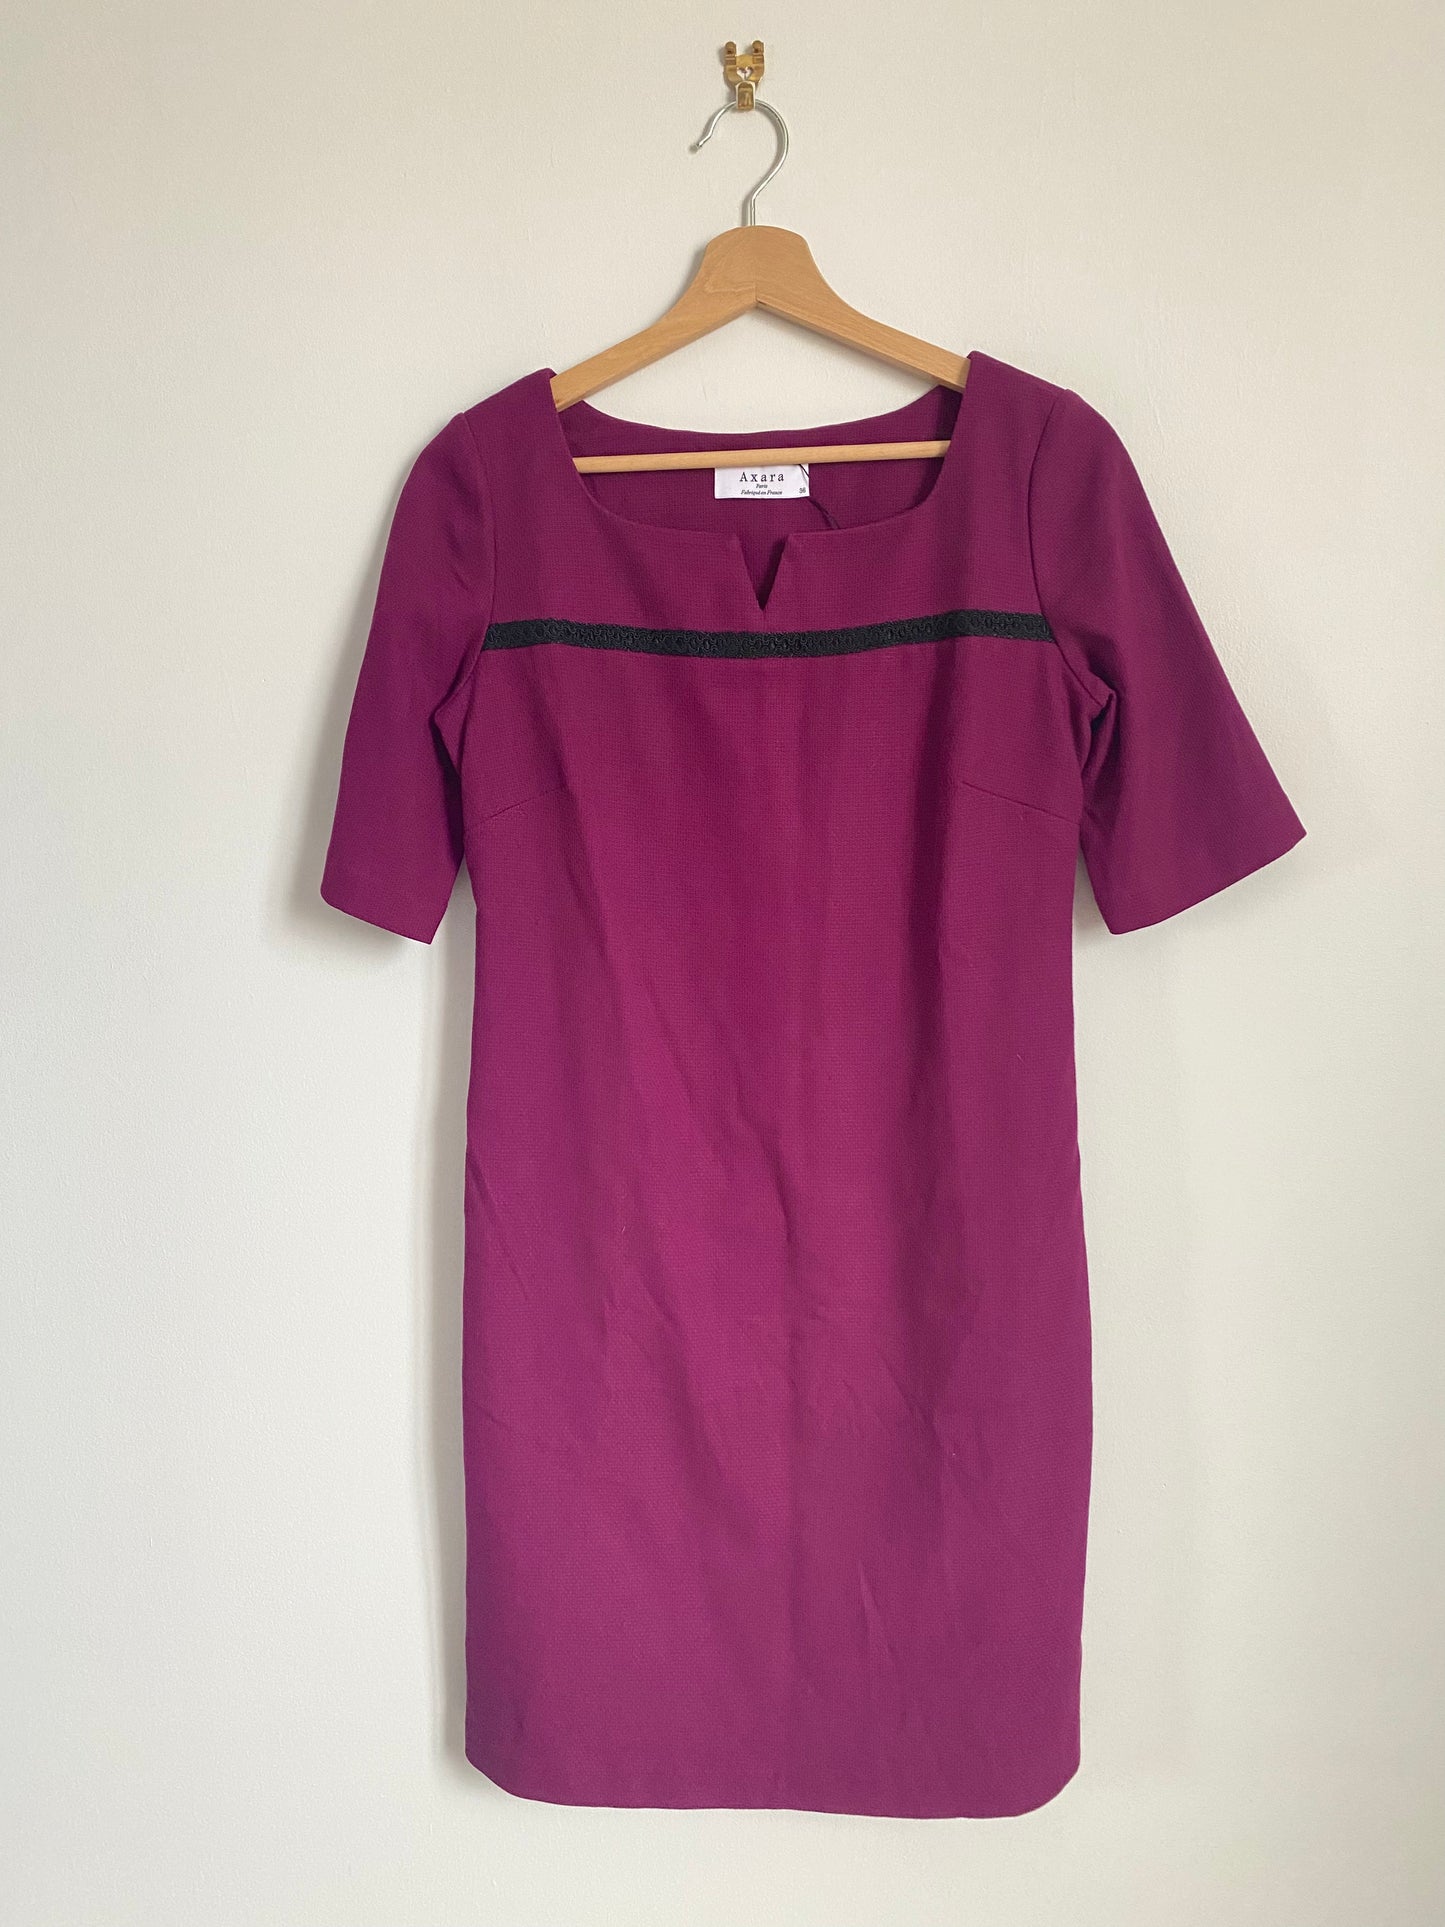 Robe Axara violette Taille 36